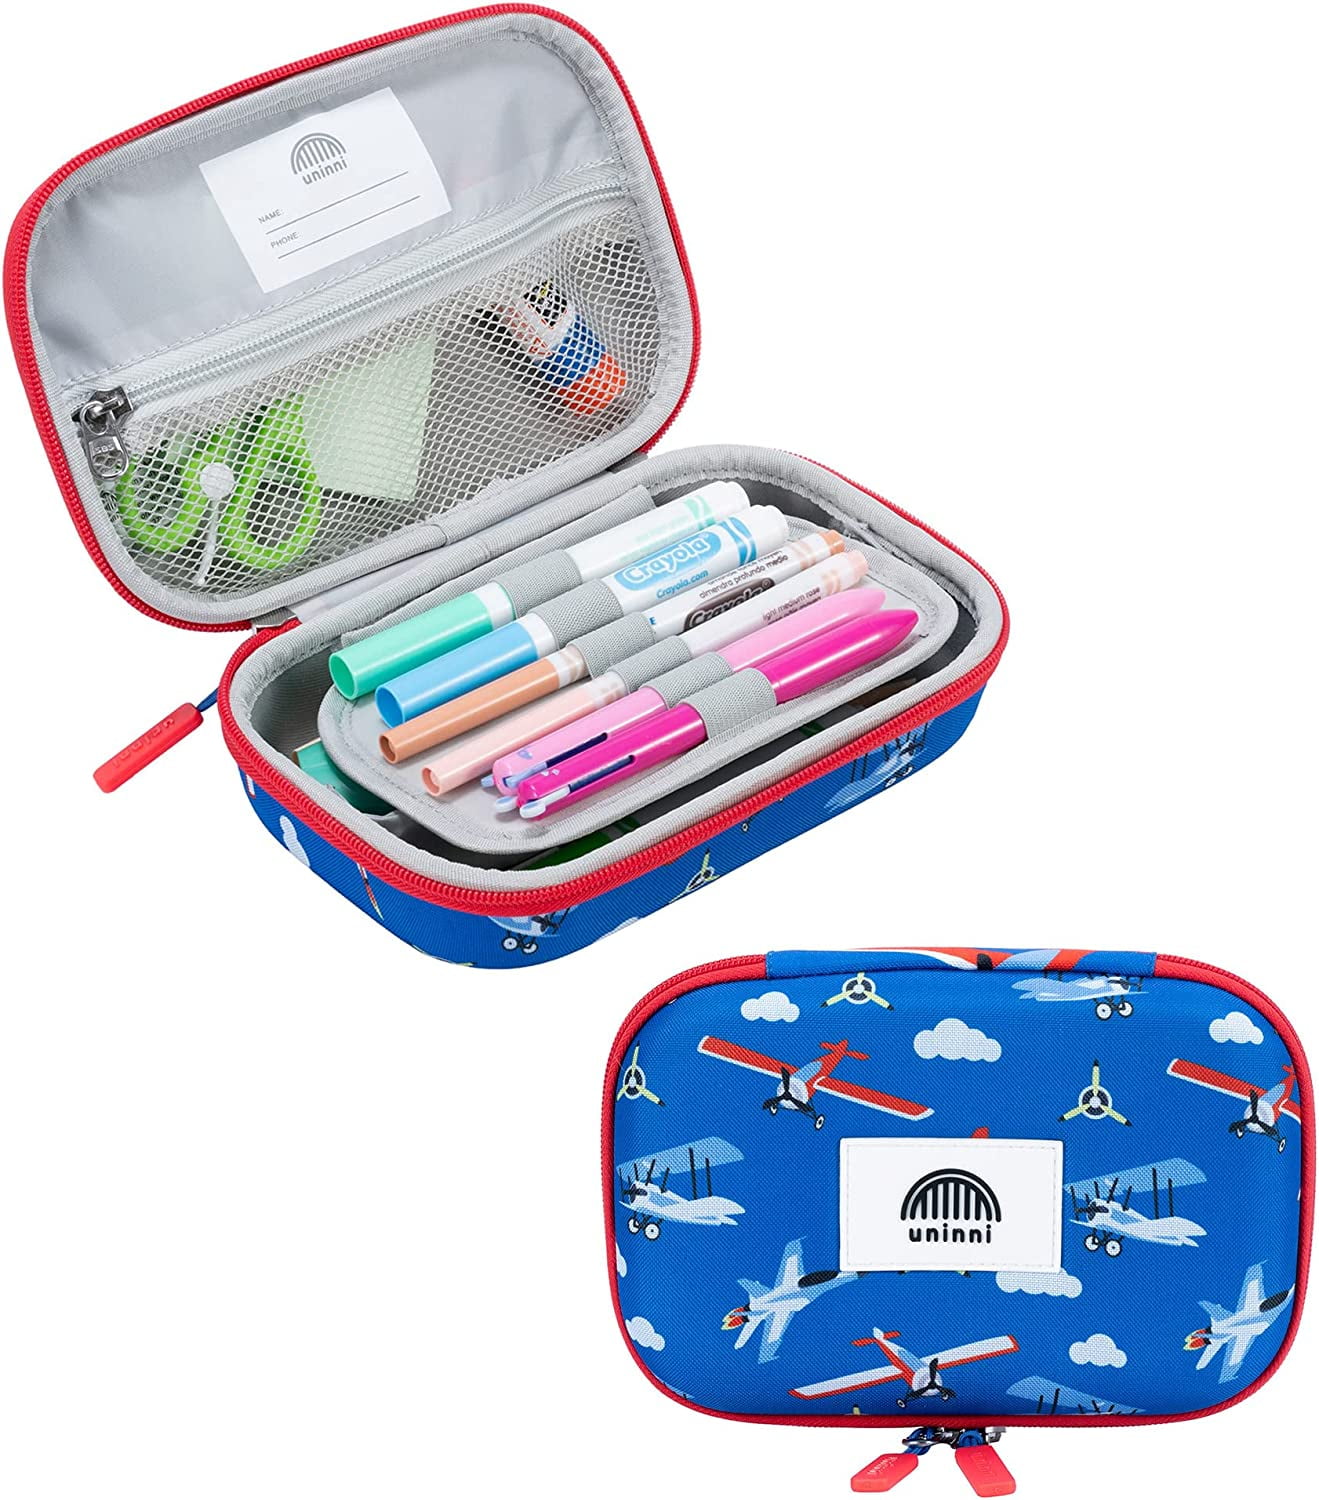 FKELYI Psychedelic Fire Soccer Pencil Bags Reusable Zipper Pencil Pouch for  Kids Boys Lightweight Pencil Case Pouch for School Supplies